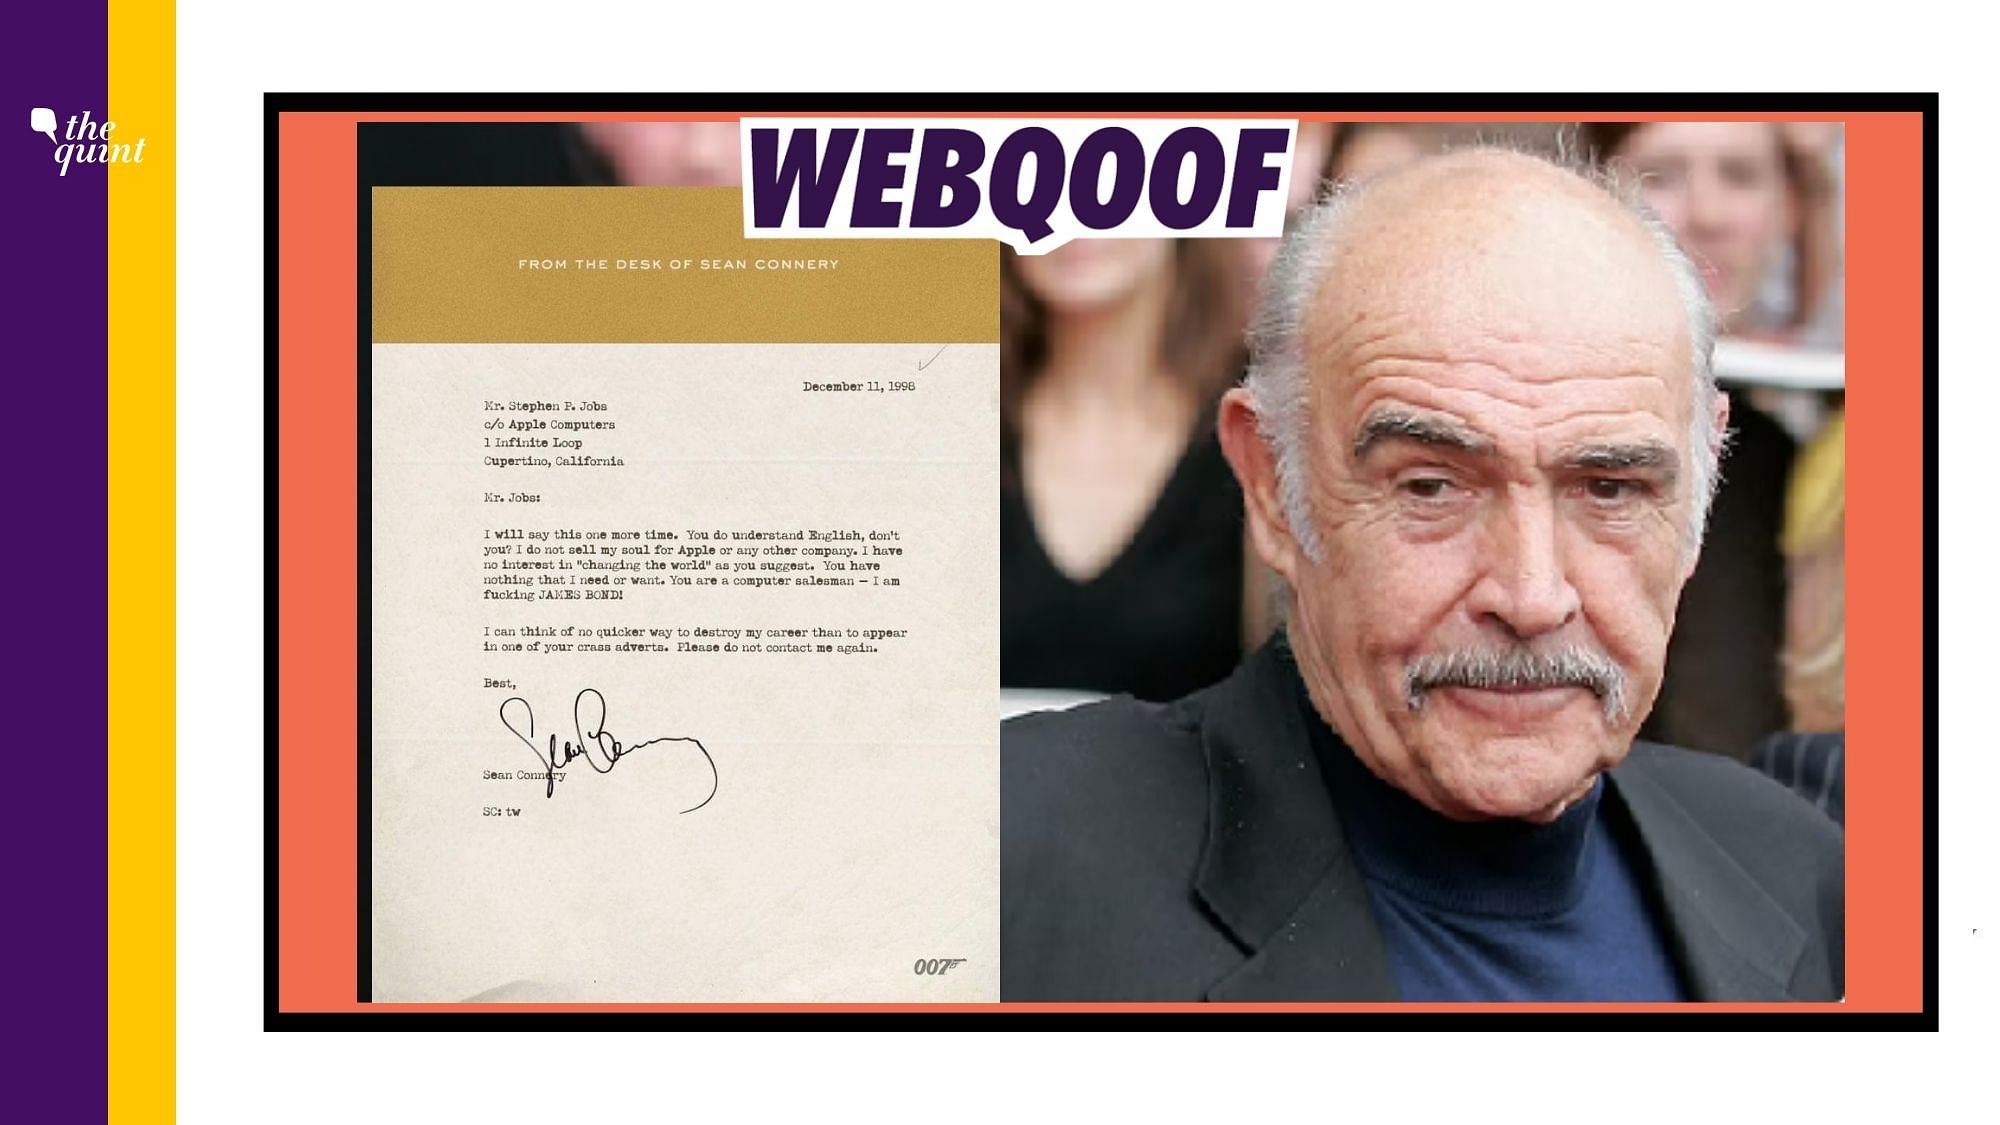 A fake letter that was doing the rounds in 2011 has been revived in the light of the Sean Connery’s death.